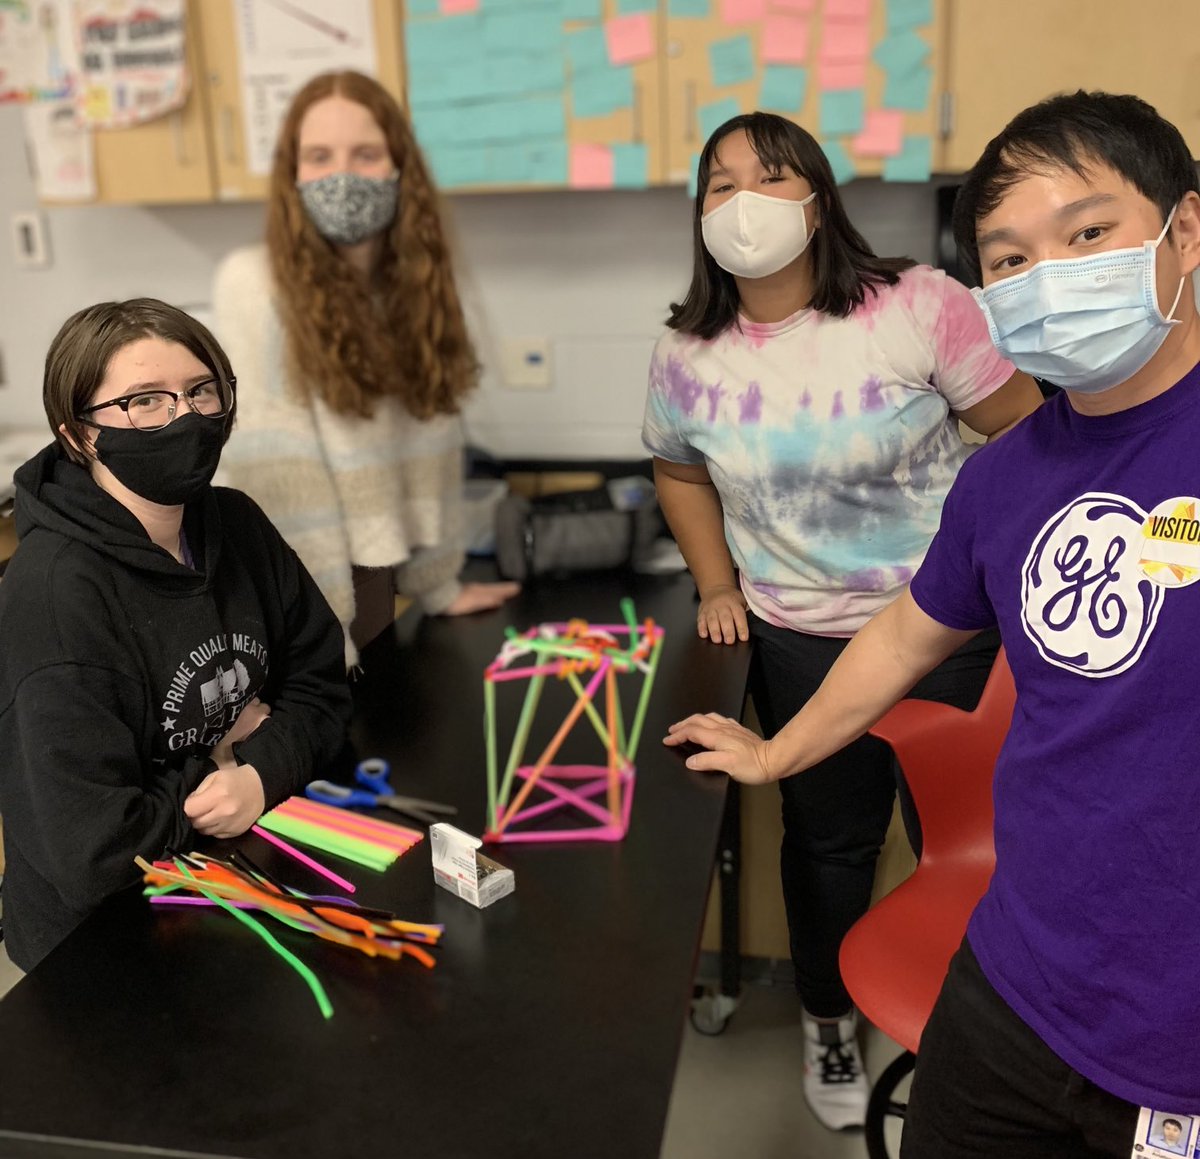 Thank you to the GE Engineers who visited our 8th grade science classes with the Tall Tower Challenge, a part of the Engineering Discovery Series.  The activity focuses on tall buildings and their structures.  #PCMSFamily #VikingDiff #NextEngineers #GEAviation